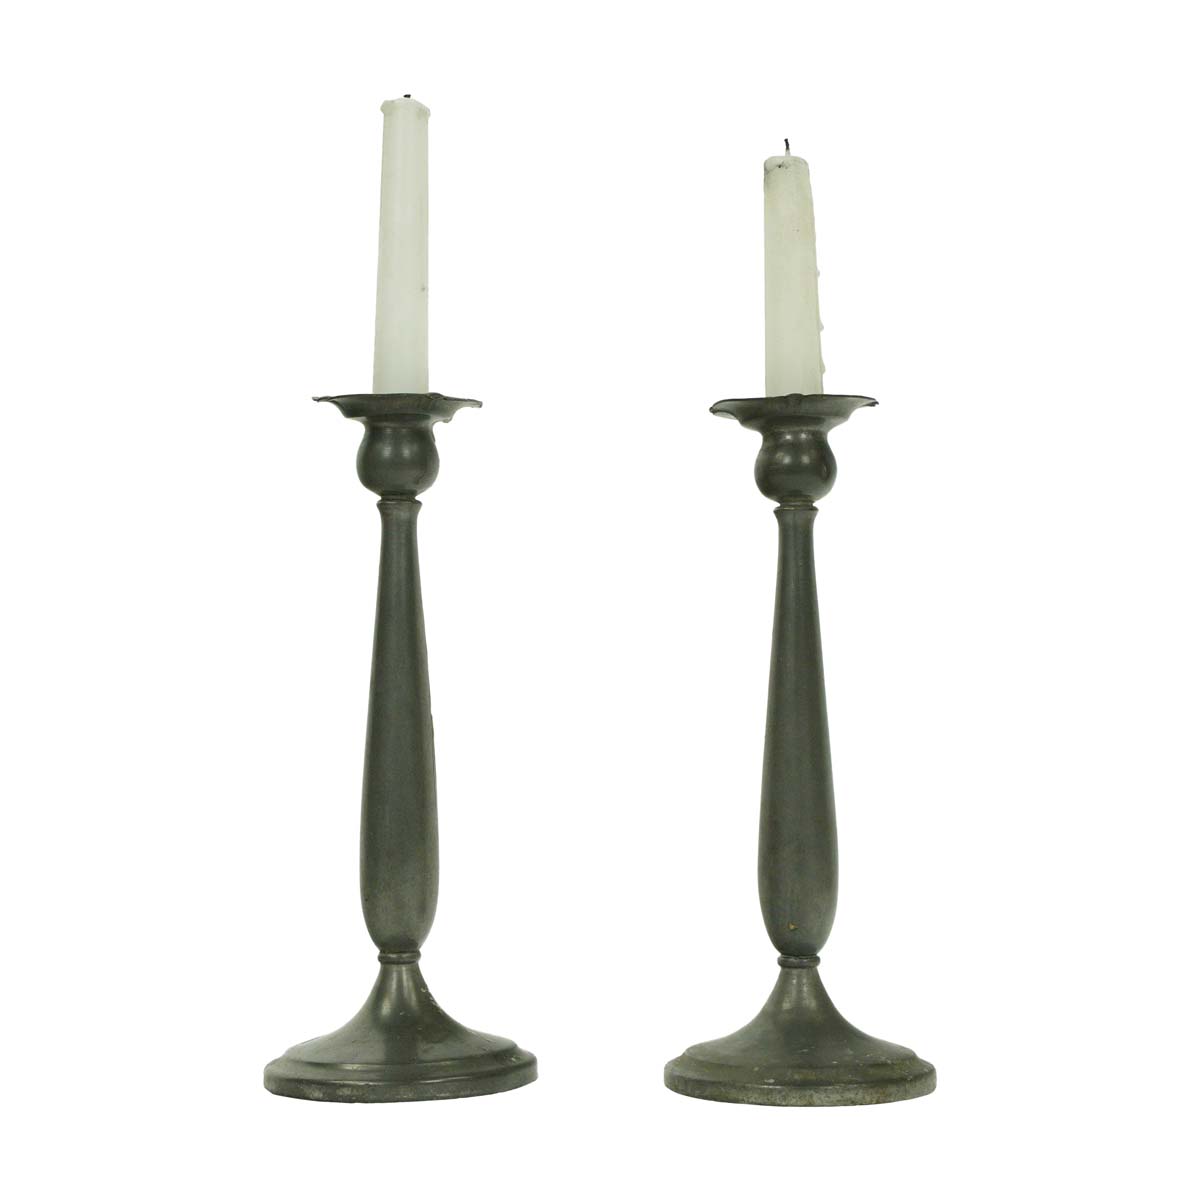 Pair of Mottahedeh Fine Dining Repro Solid Brass Candle Holders